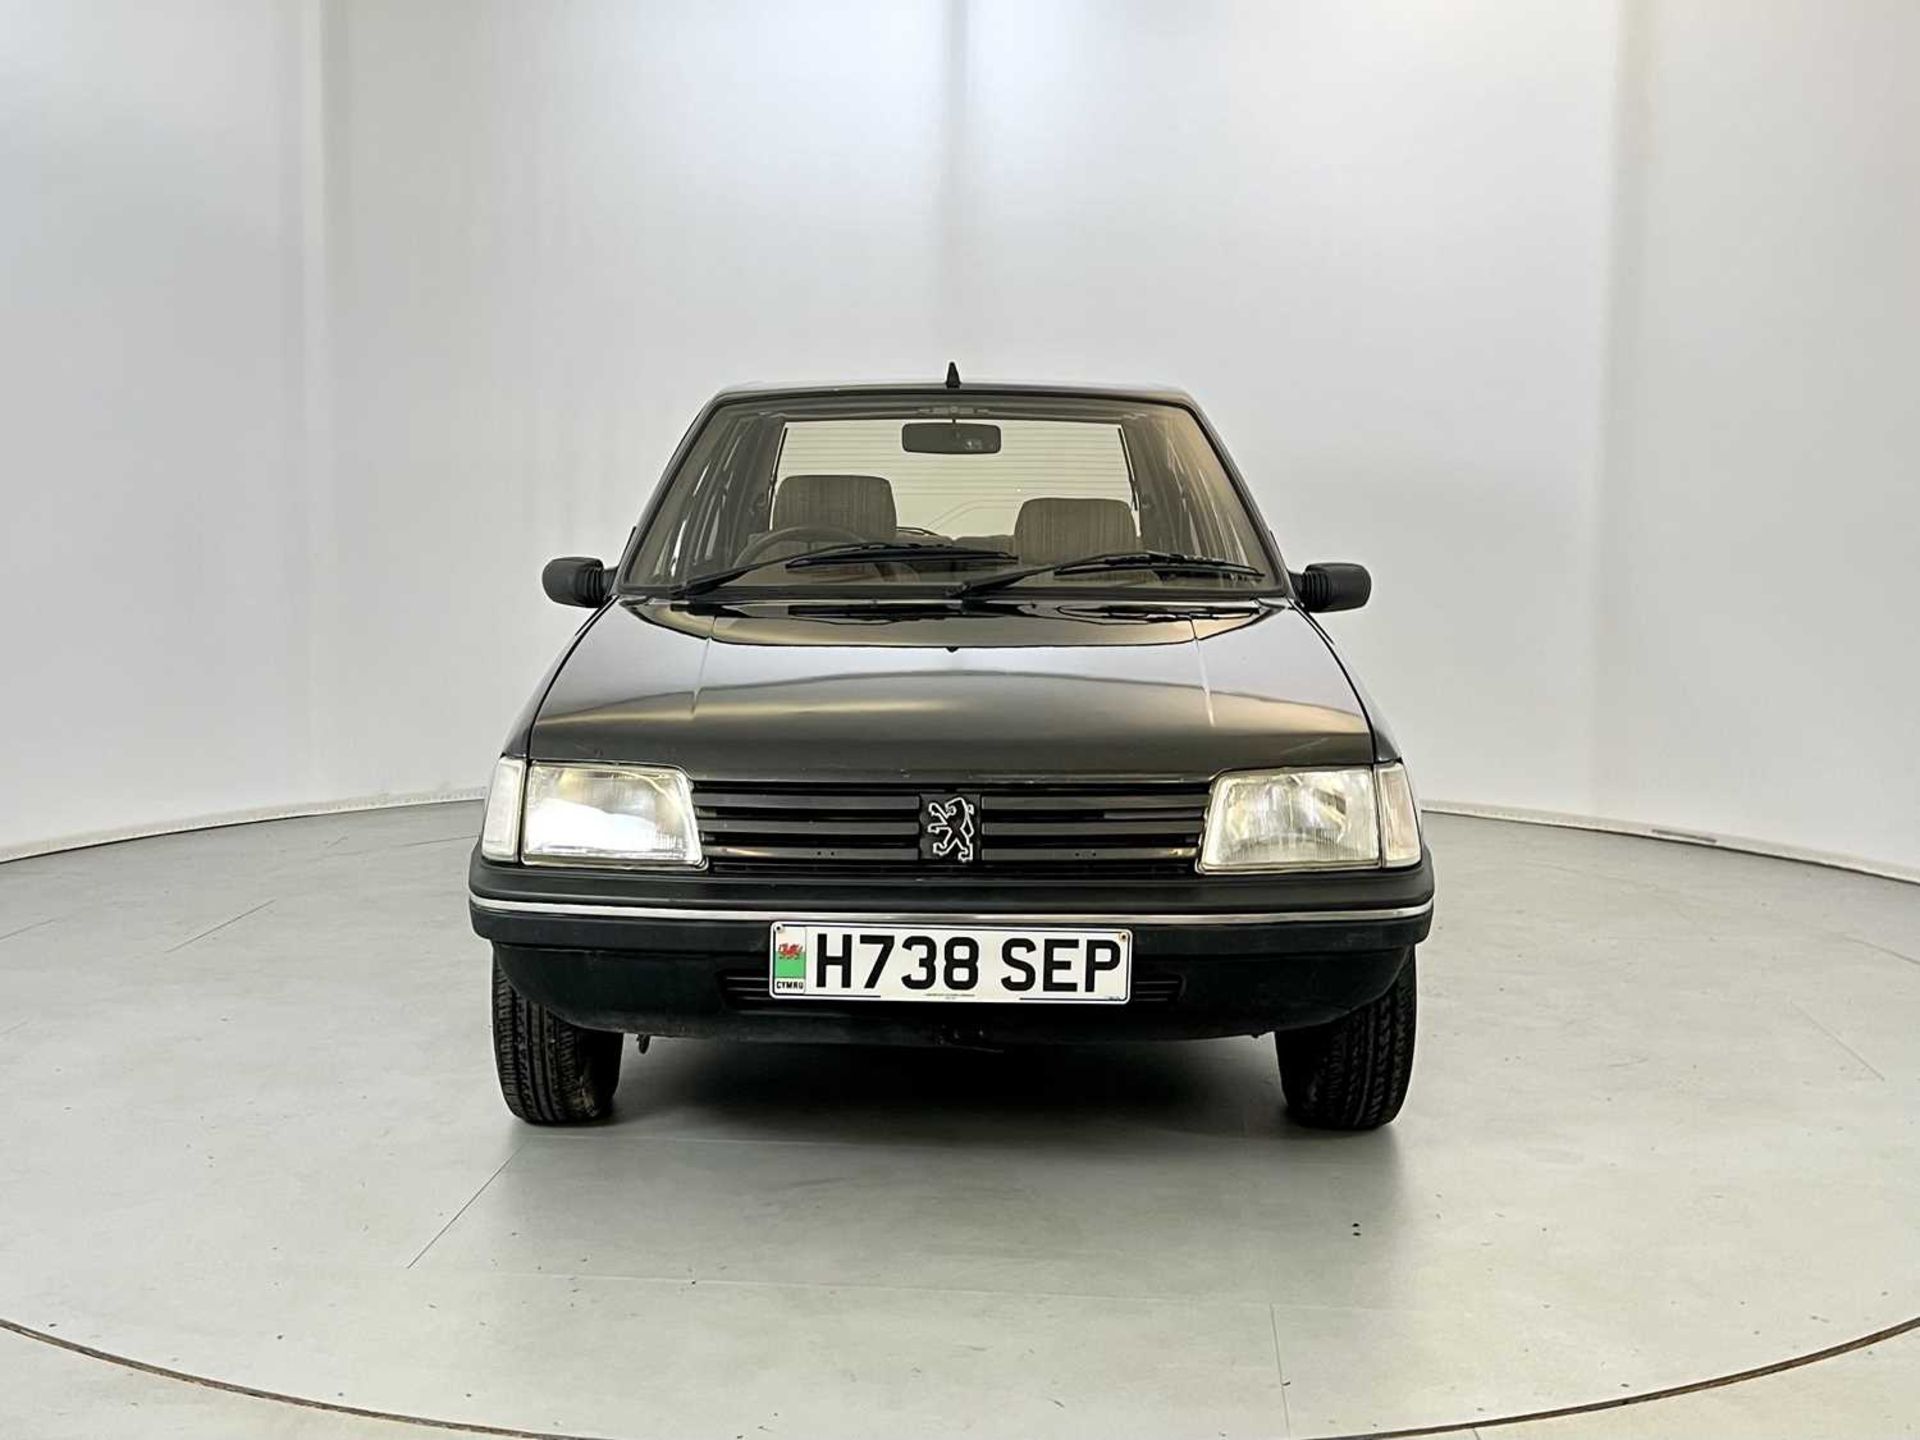 1990 Peugeot 205 GRD - Image 2 of 33